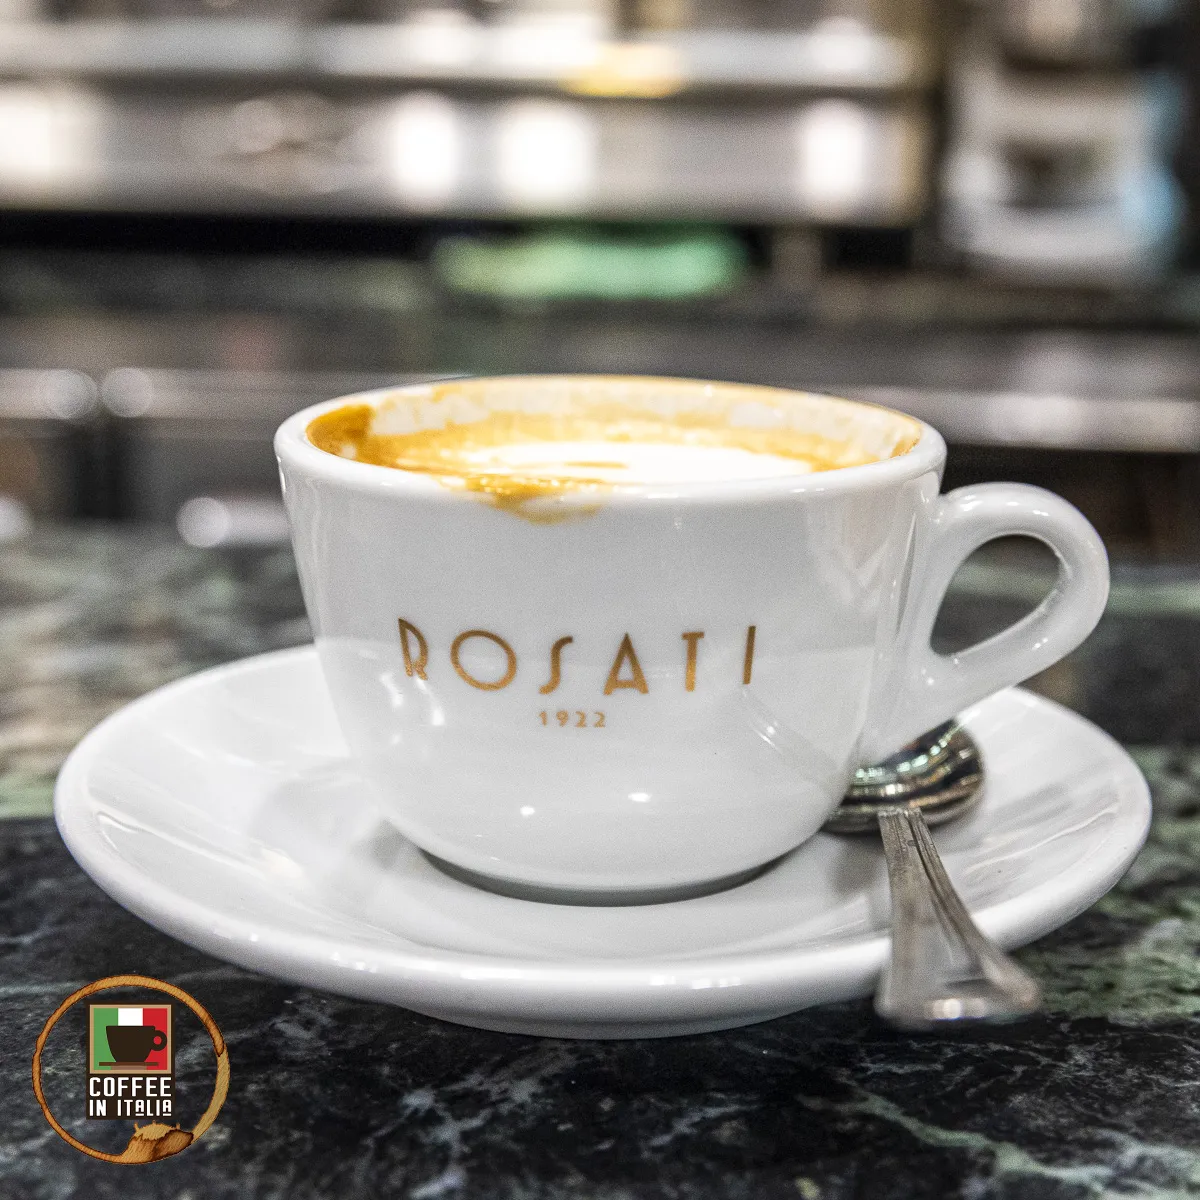 Italian coffee traditions - step up to the bar
